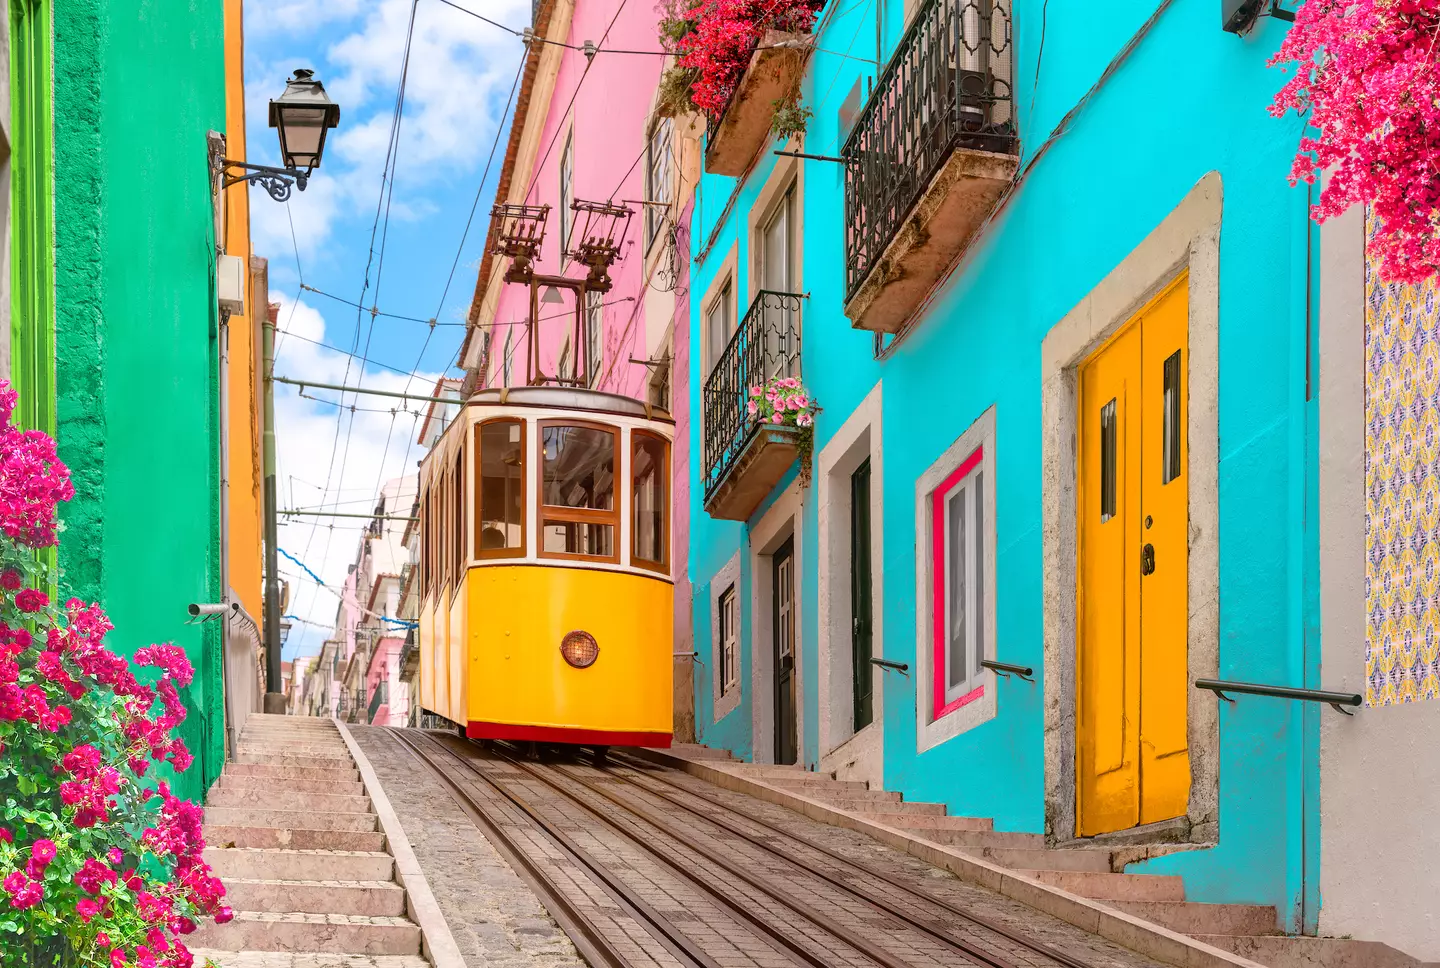 Porto is known for its colourful streets.